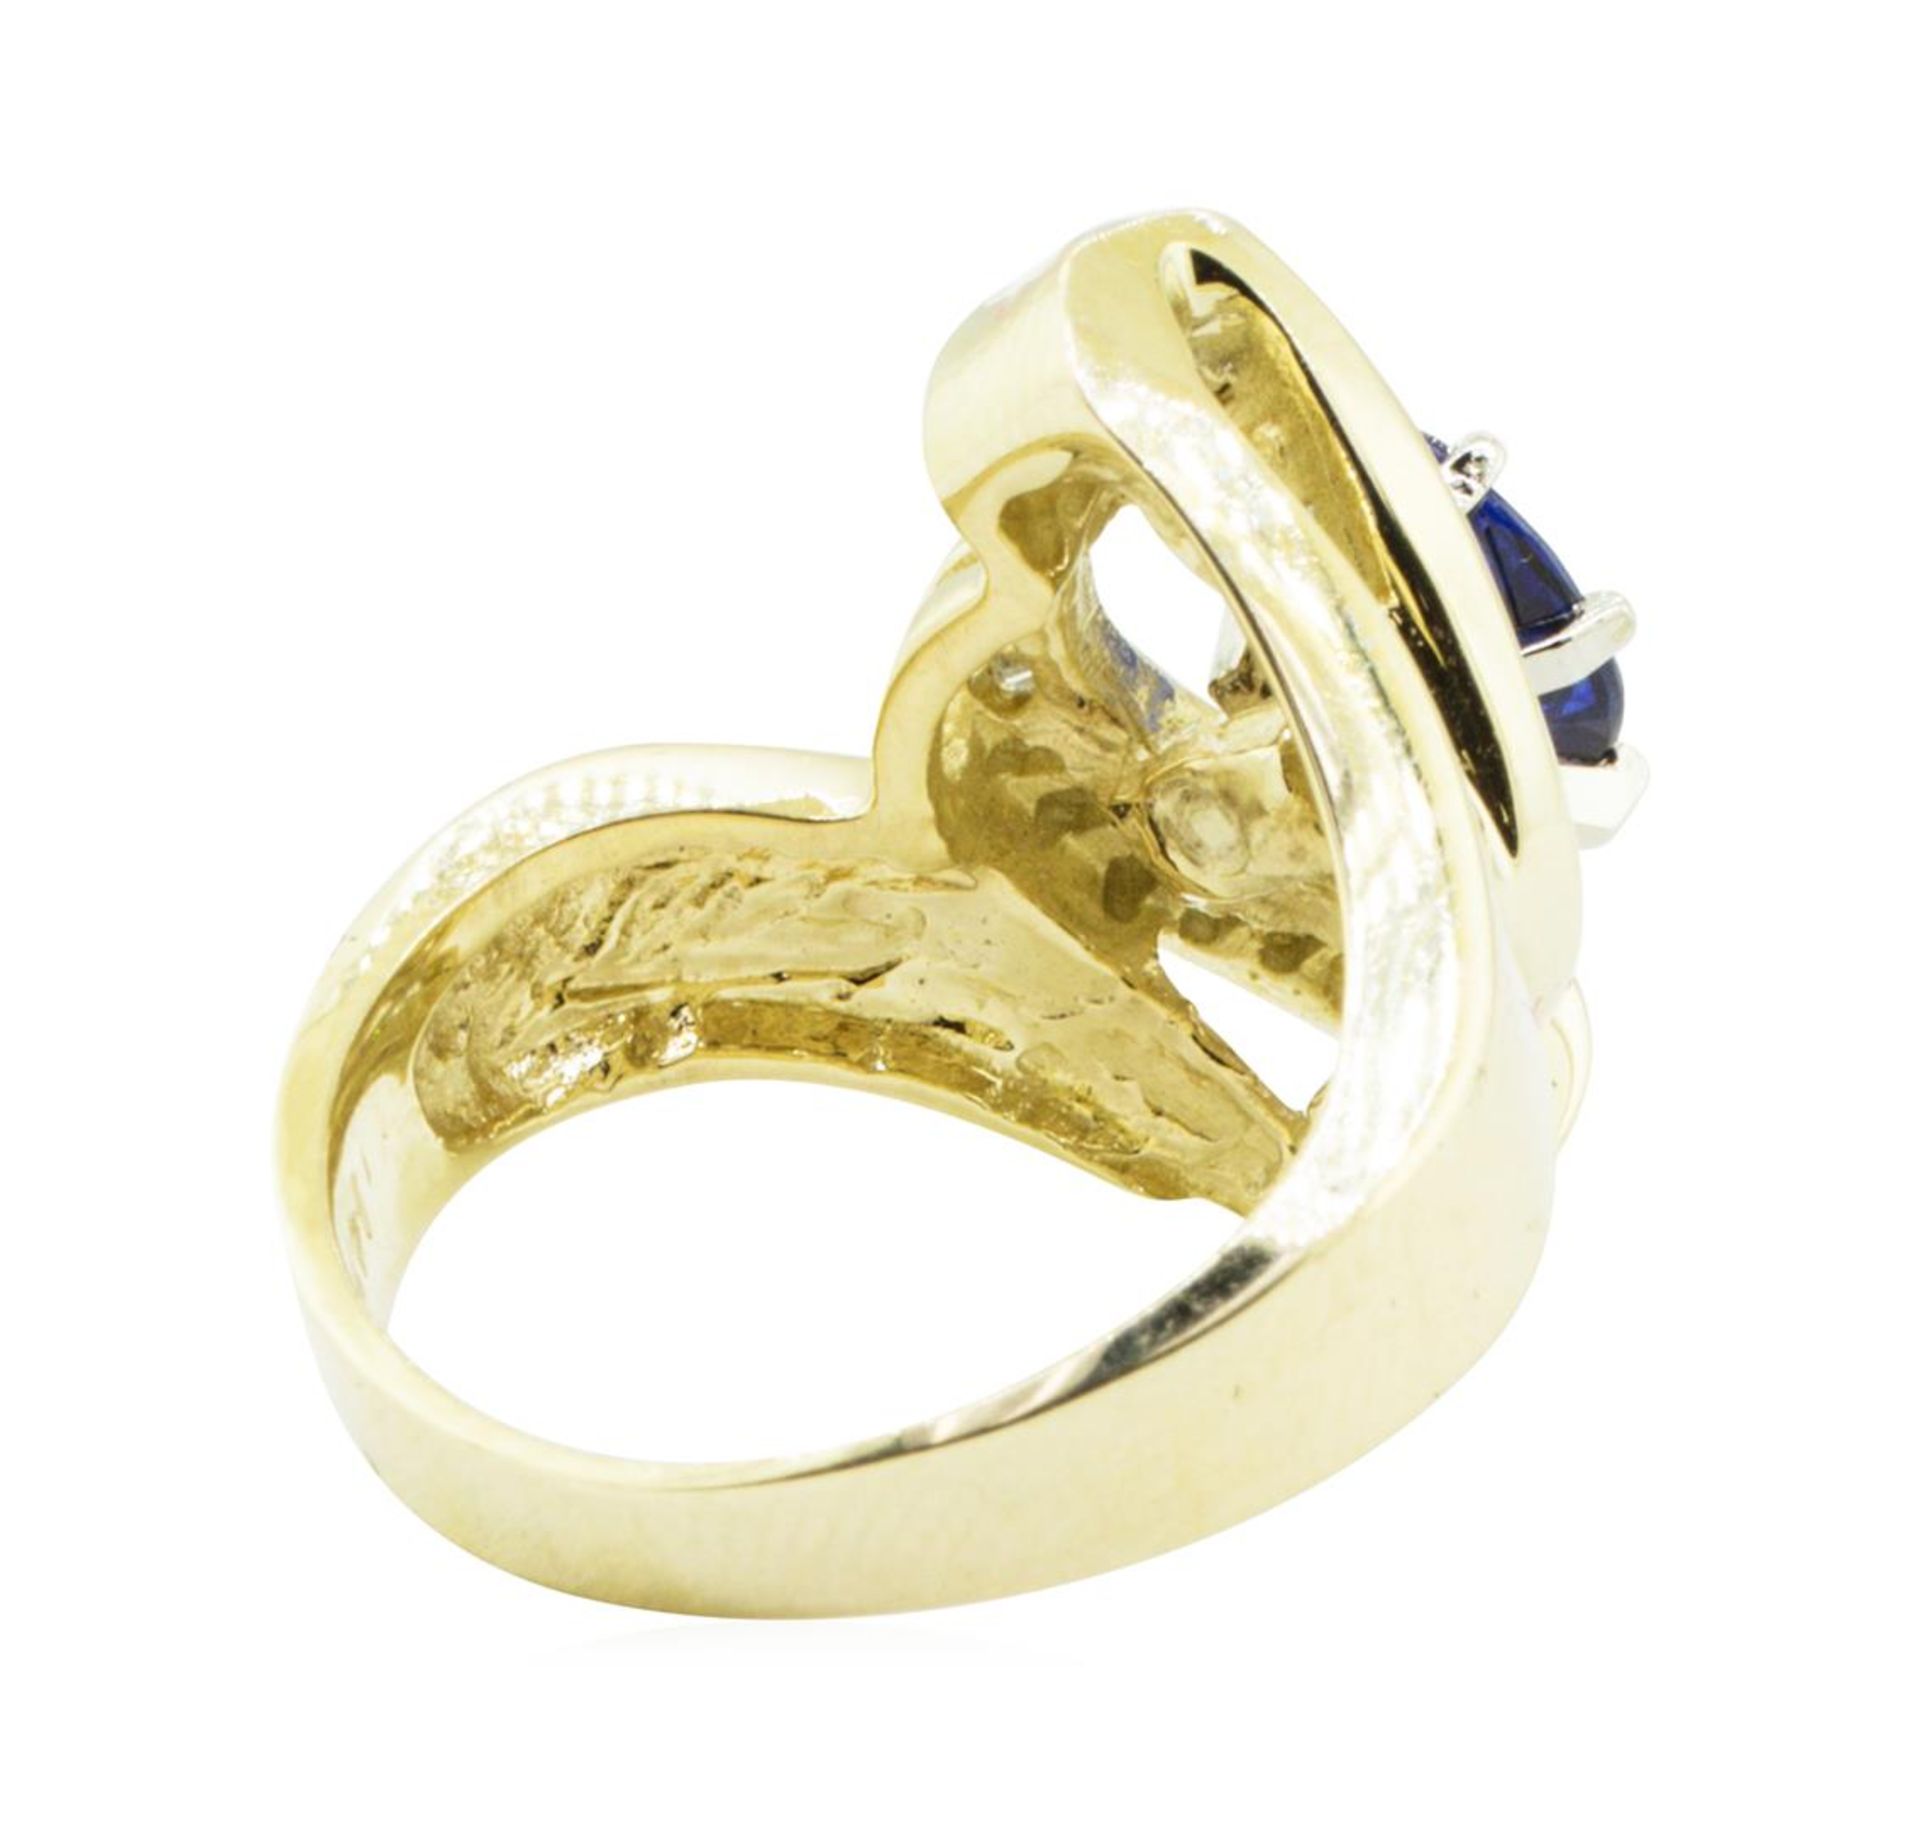 1.58 ctw Oval Brilliant Blue Sapphire And Diamond Ring - 14KT Yellow Gold - Image 3 of 5